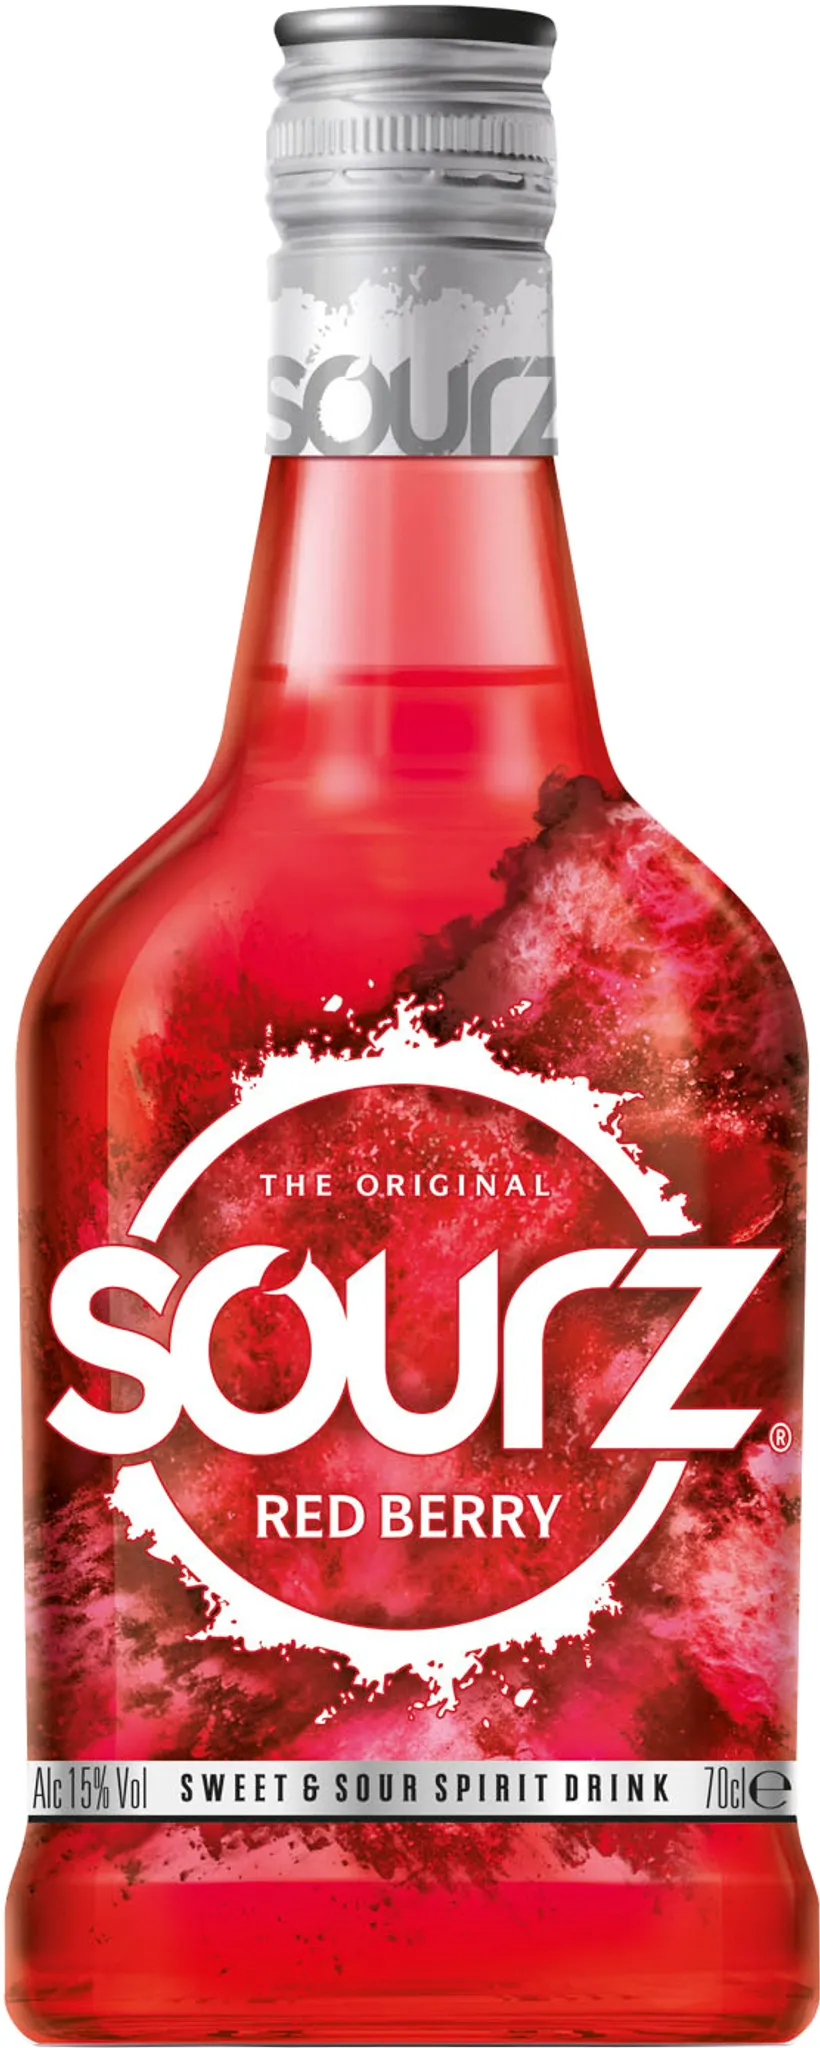 Sourz Red Berry The Original Sweet and Sour